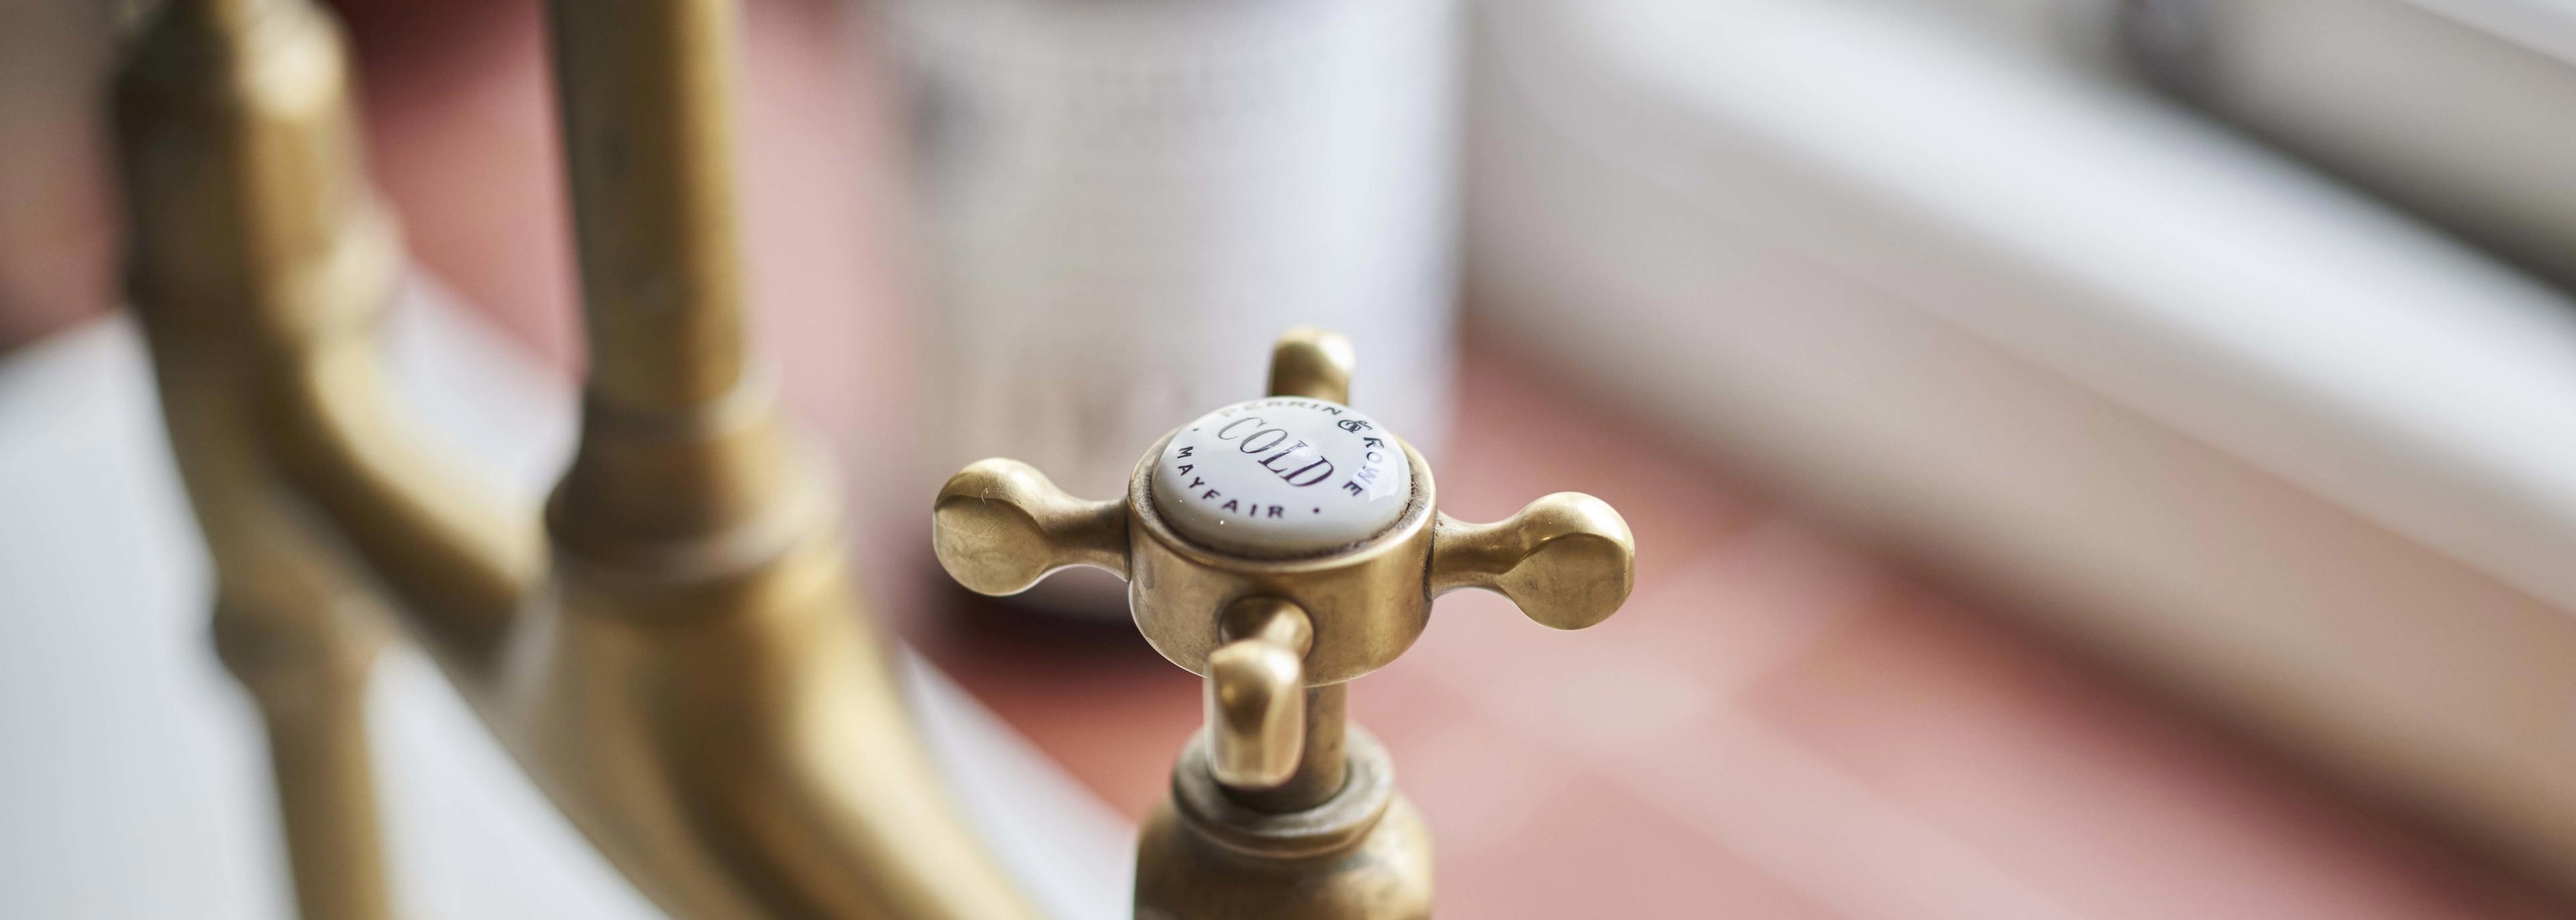 Caring for your Perrin & Rowe tap